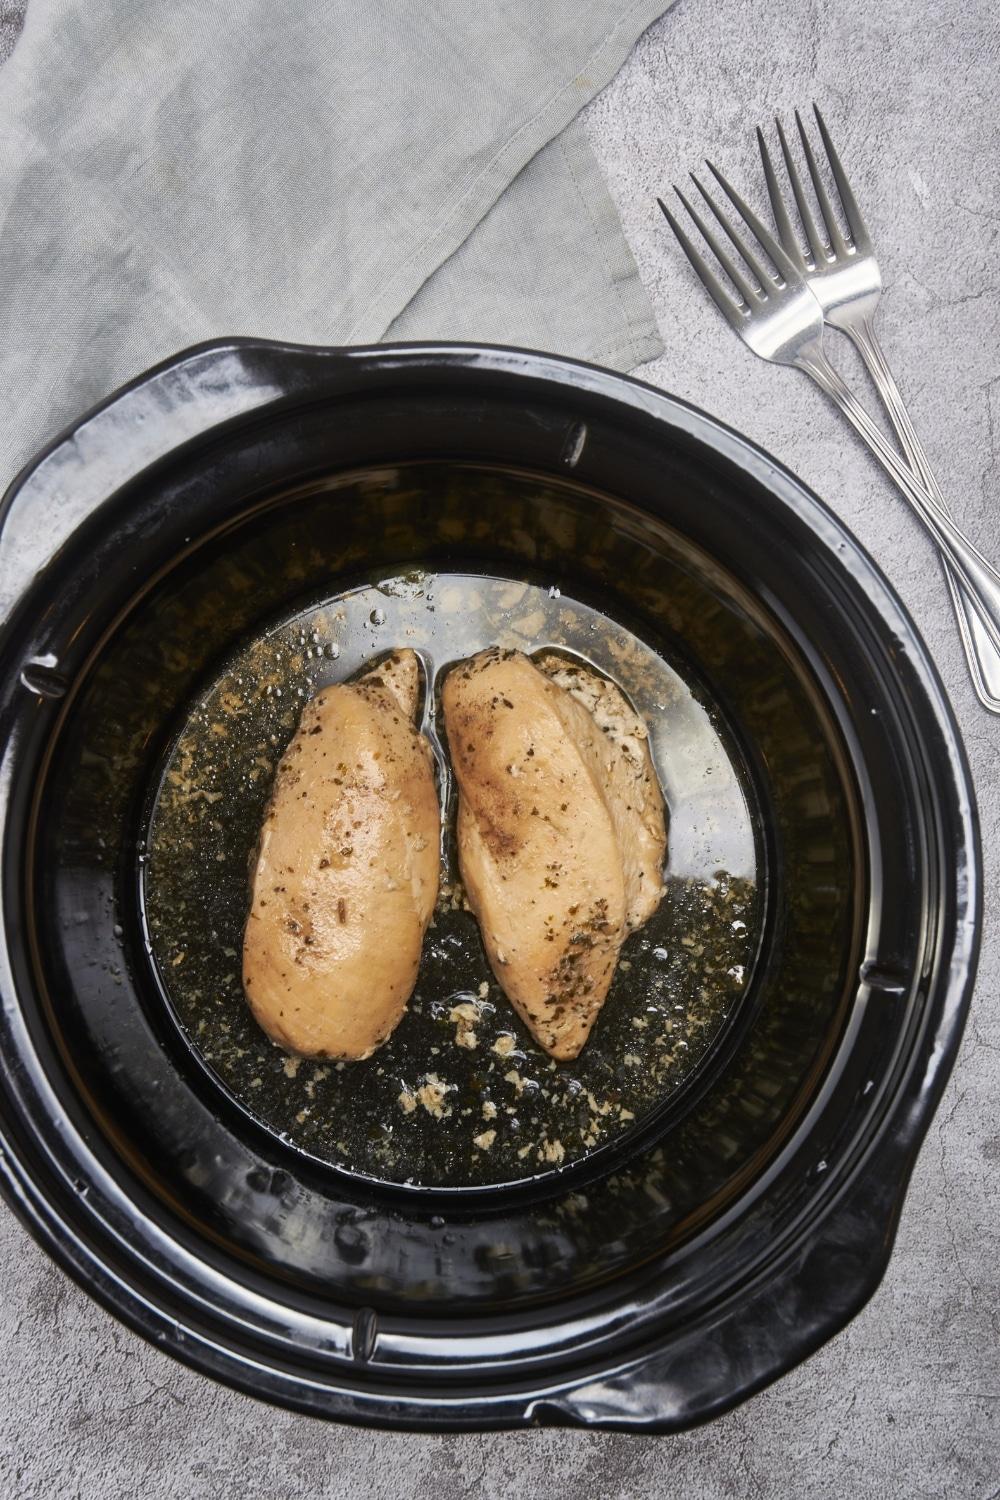 Two seasoned and cooked chicken breasts in the bottom of a black crockpot.